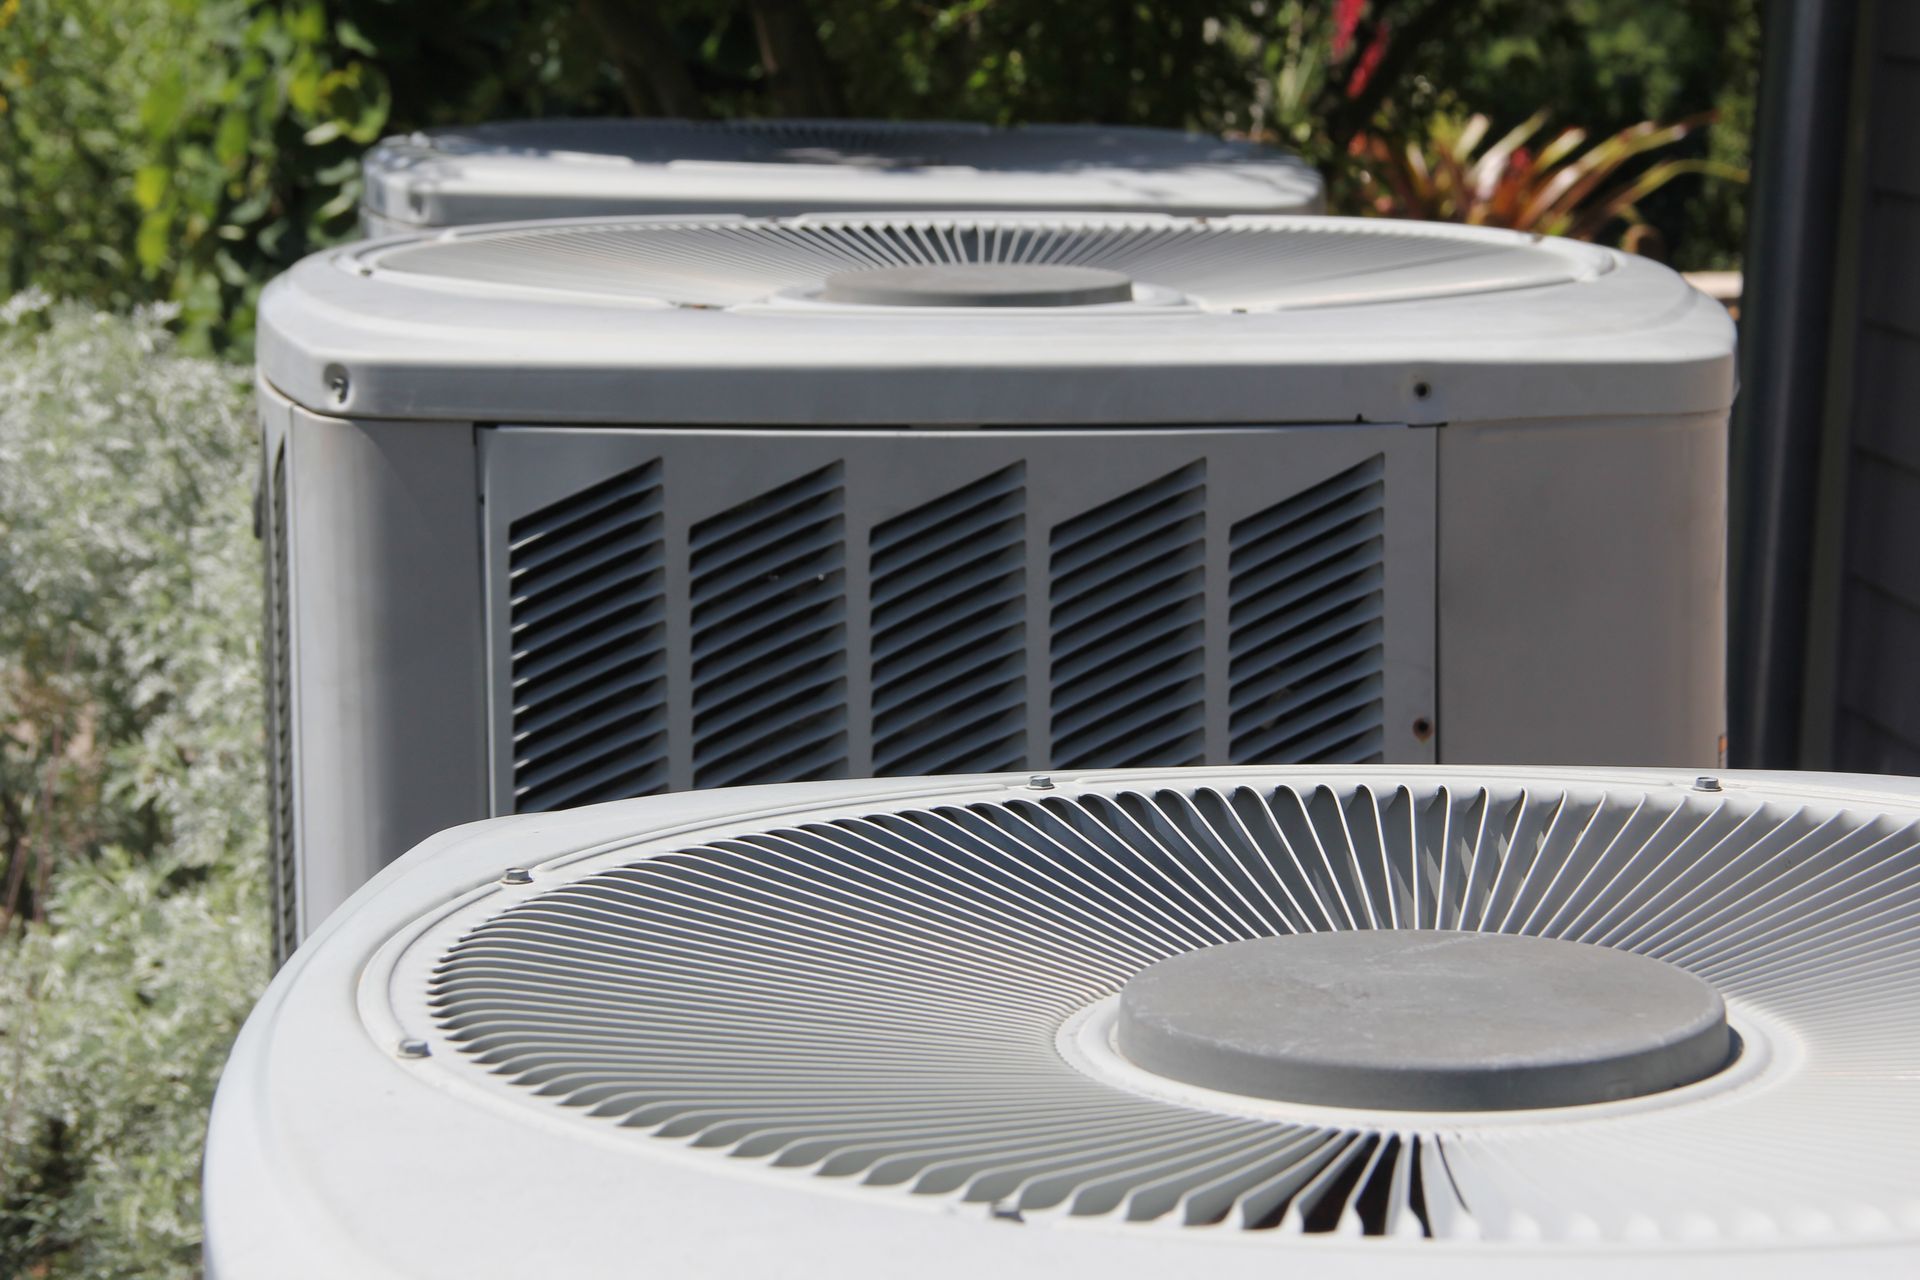 Outdoor HVAC system showing the Evaporator Coils